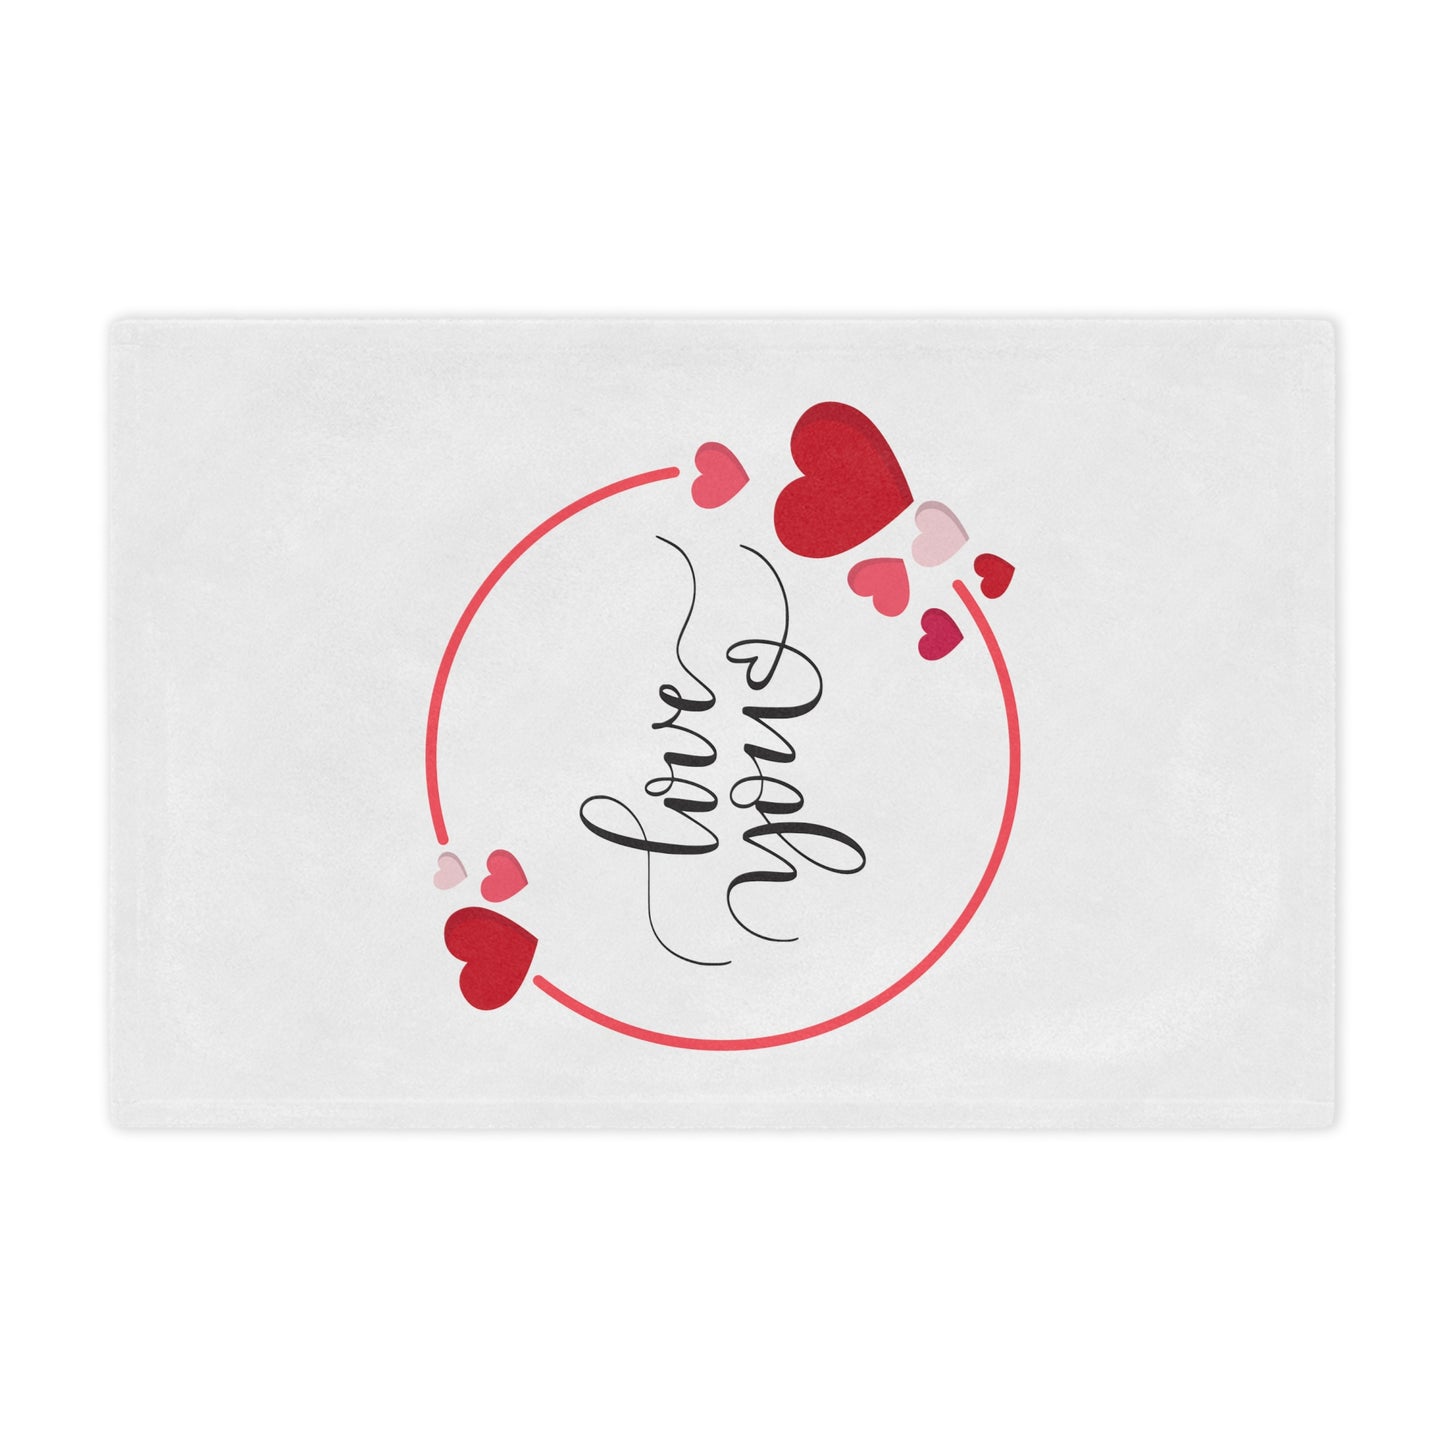 Love You with Flying Hearts Printed Valentine Minky Blanket